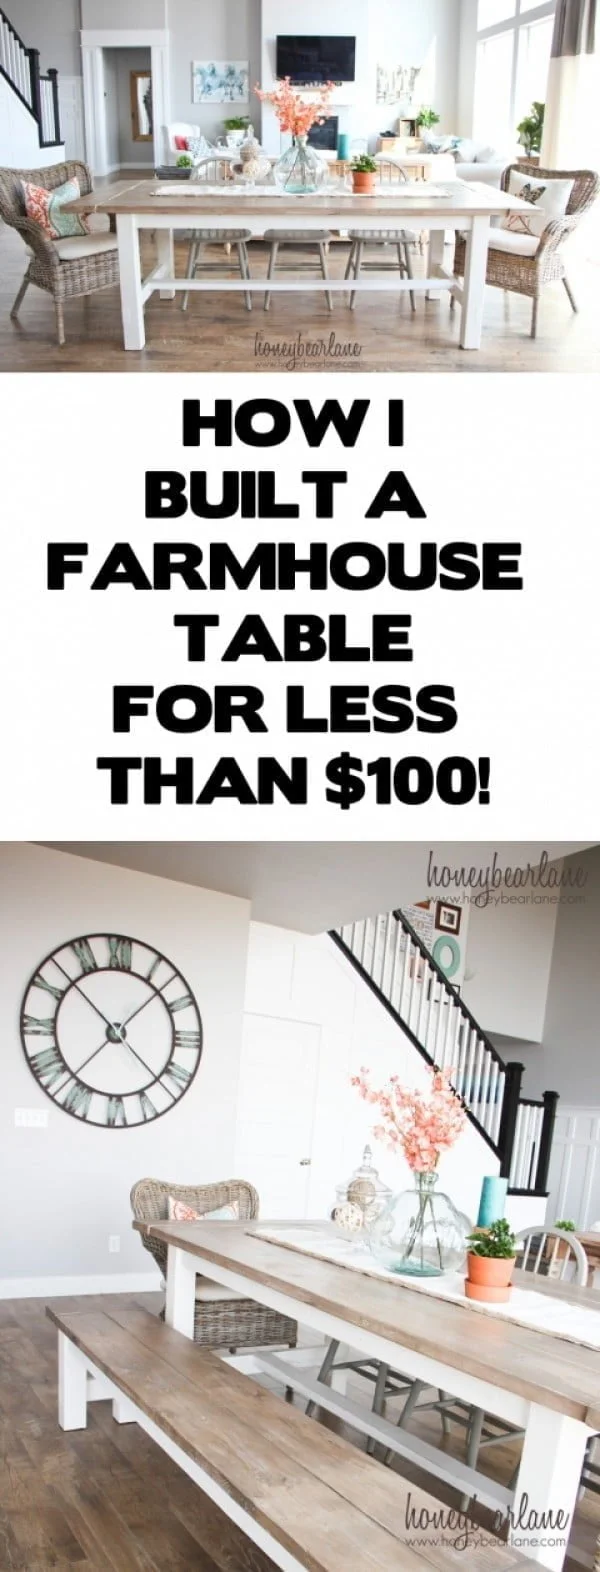 Check out the tutorial how to build a DIY farmhouse table for under $100 